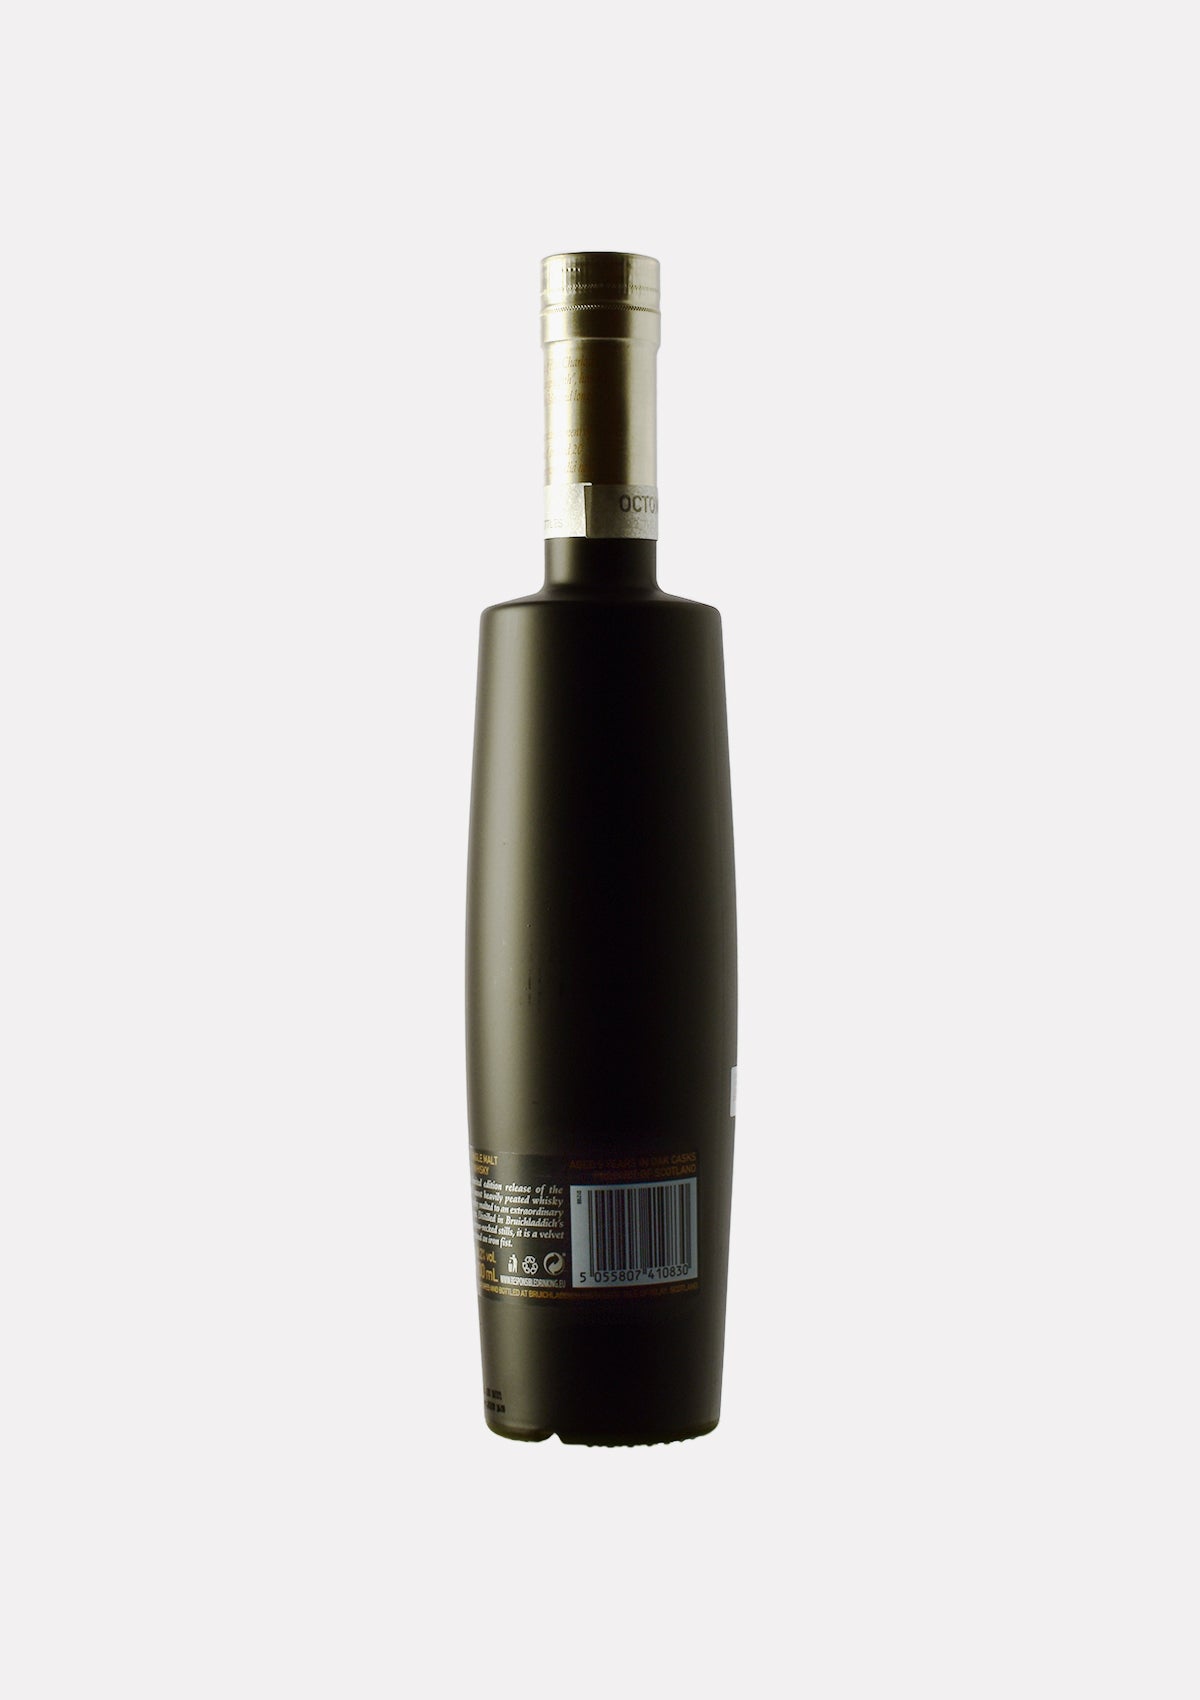 Octomore 09.2 156 ppm